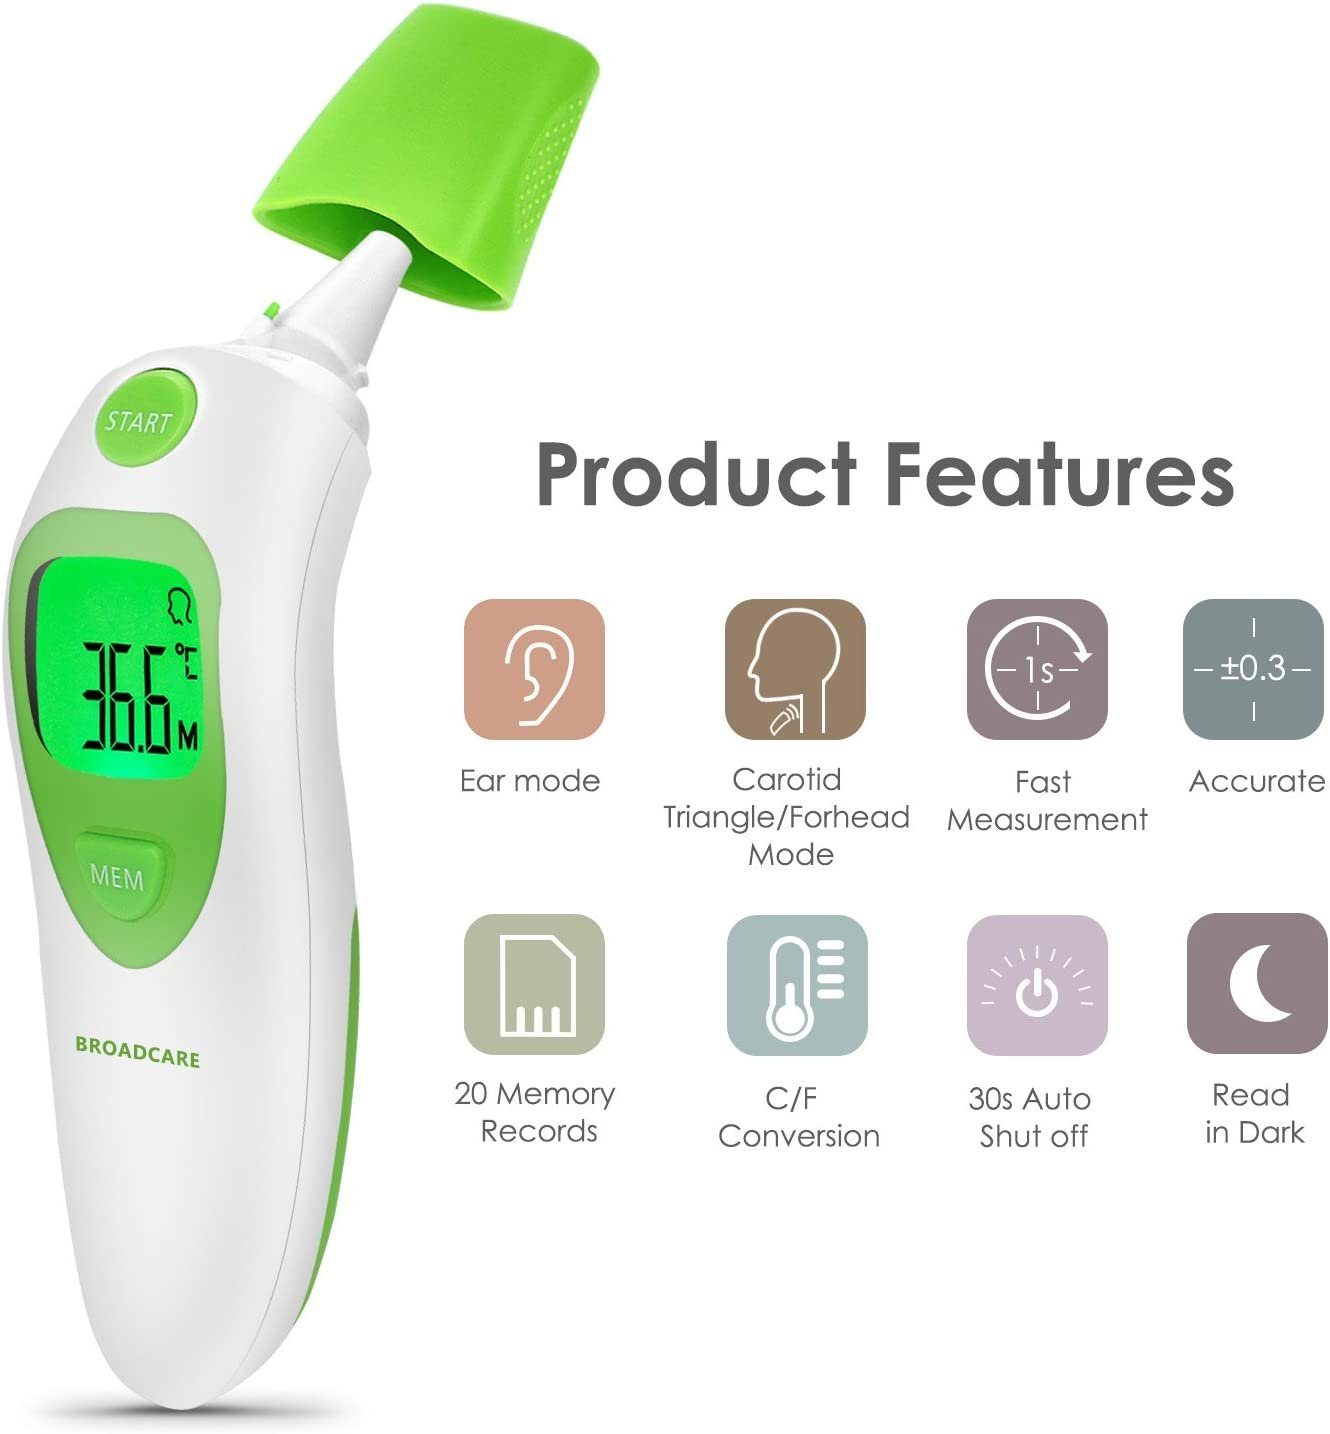 Broadcare Ohr-Fieberthermometer, 4in1 Infrarot Fieberthermometer Stirn Stirnthermometer kontaktlos digital Thermometer Ohr LCD